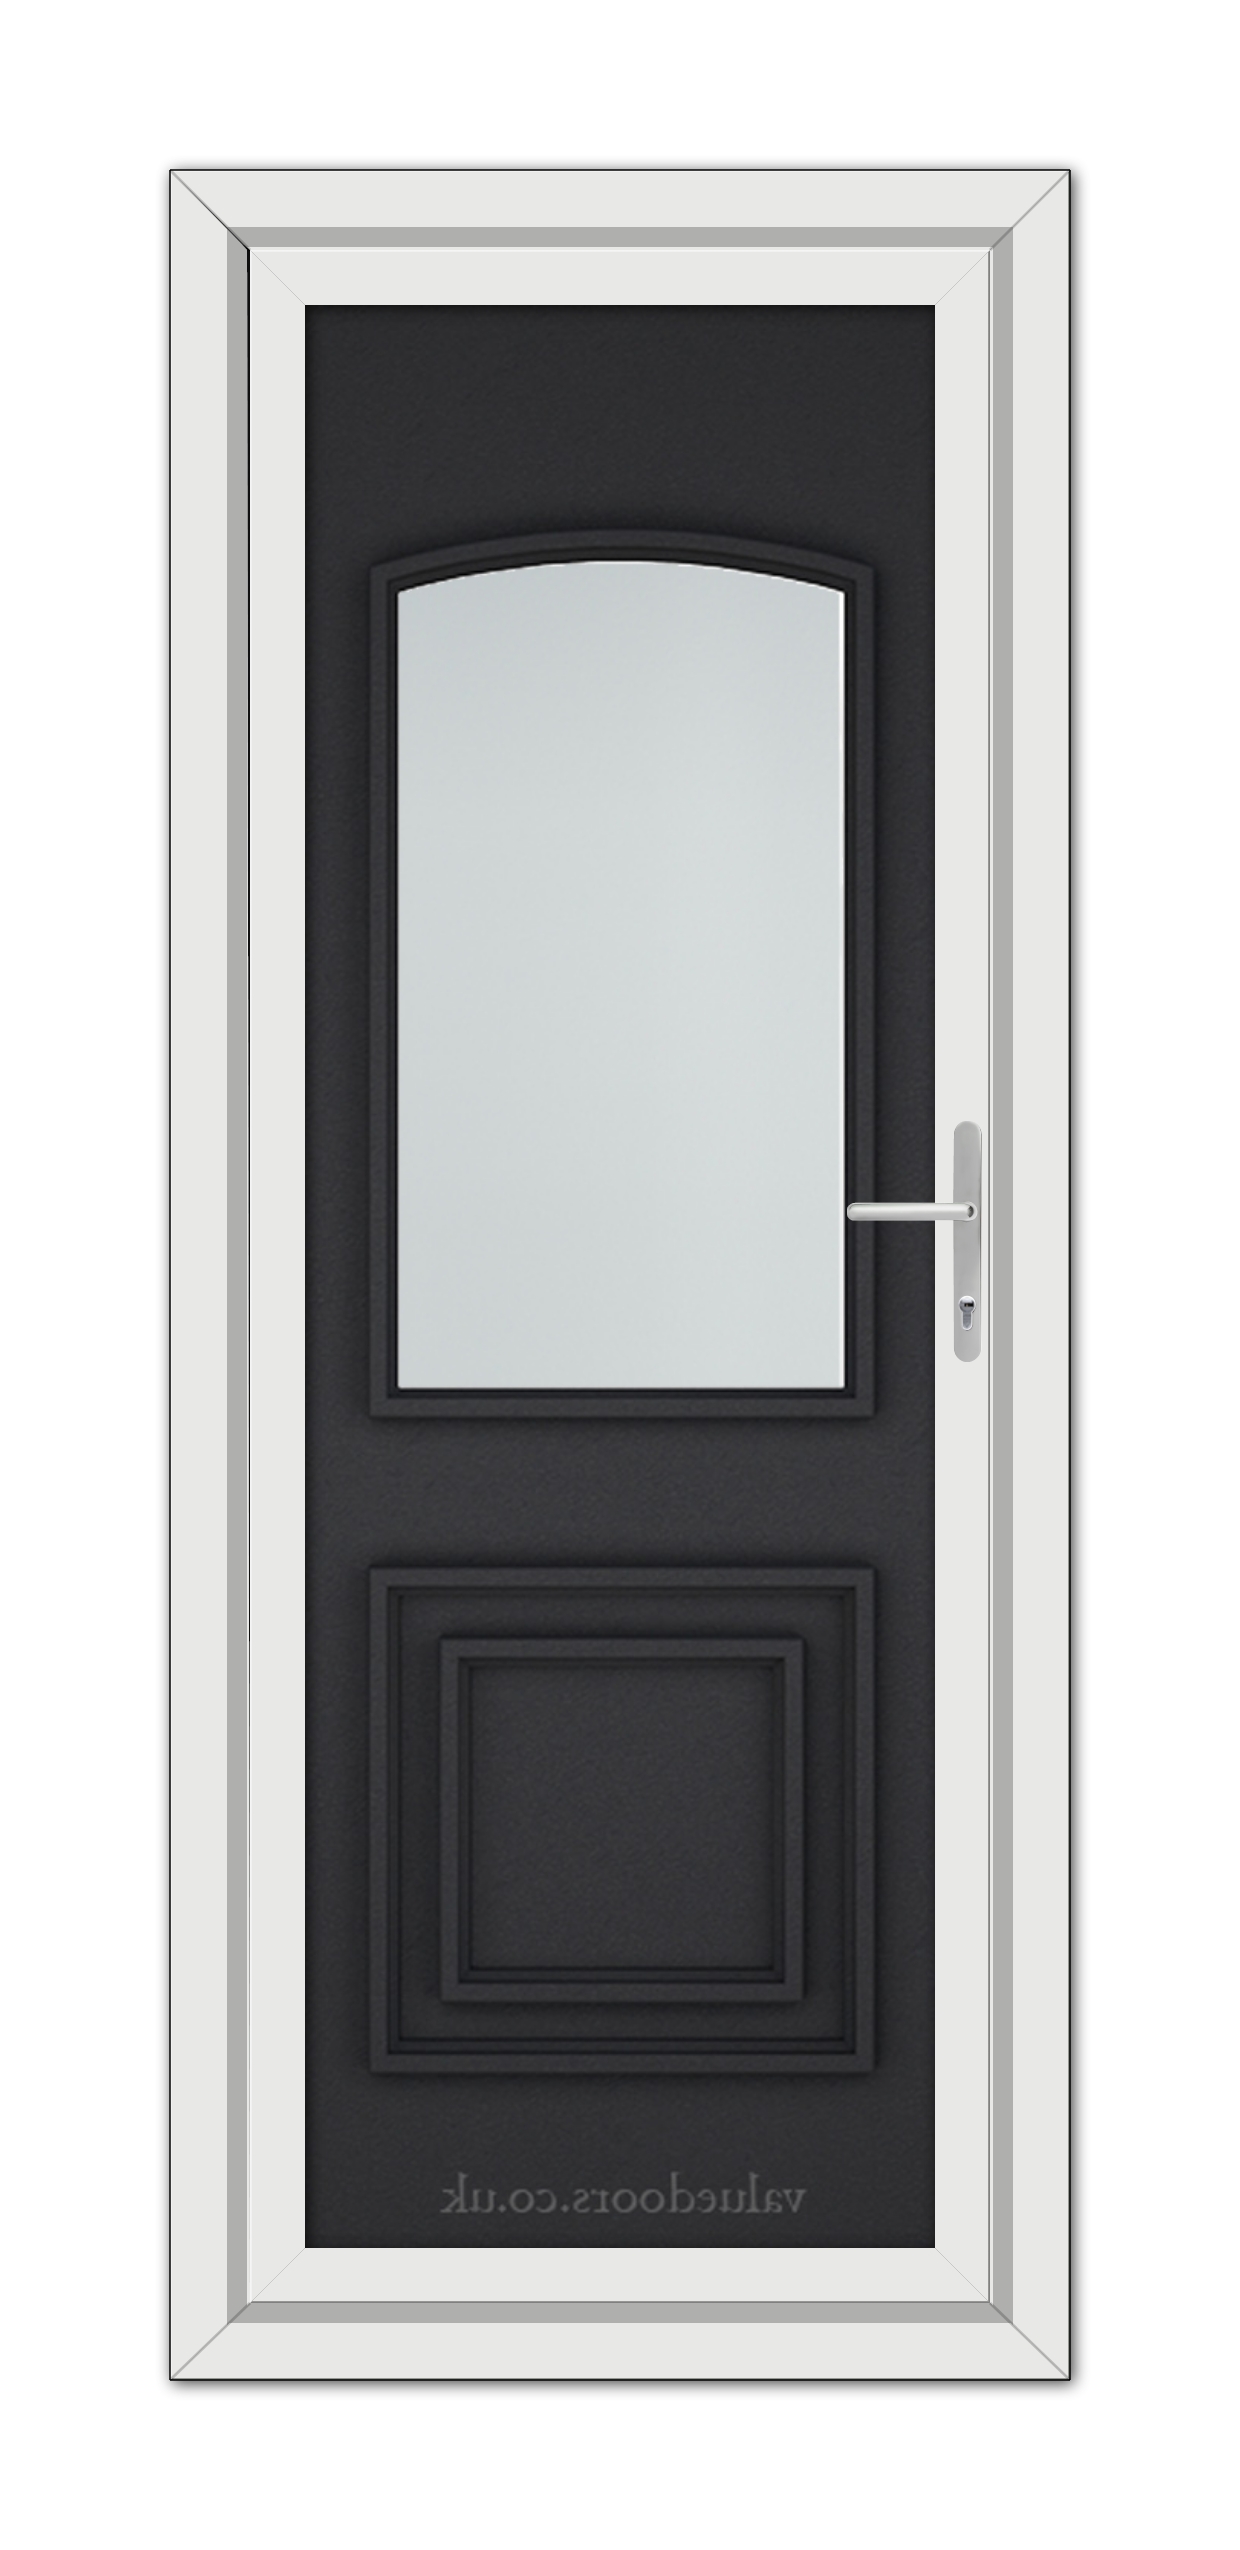 A modern Black Brown Balmoral Classic uPVC door with a vertical glass window, silver handle, and white frame, viewed from front.